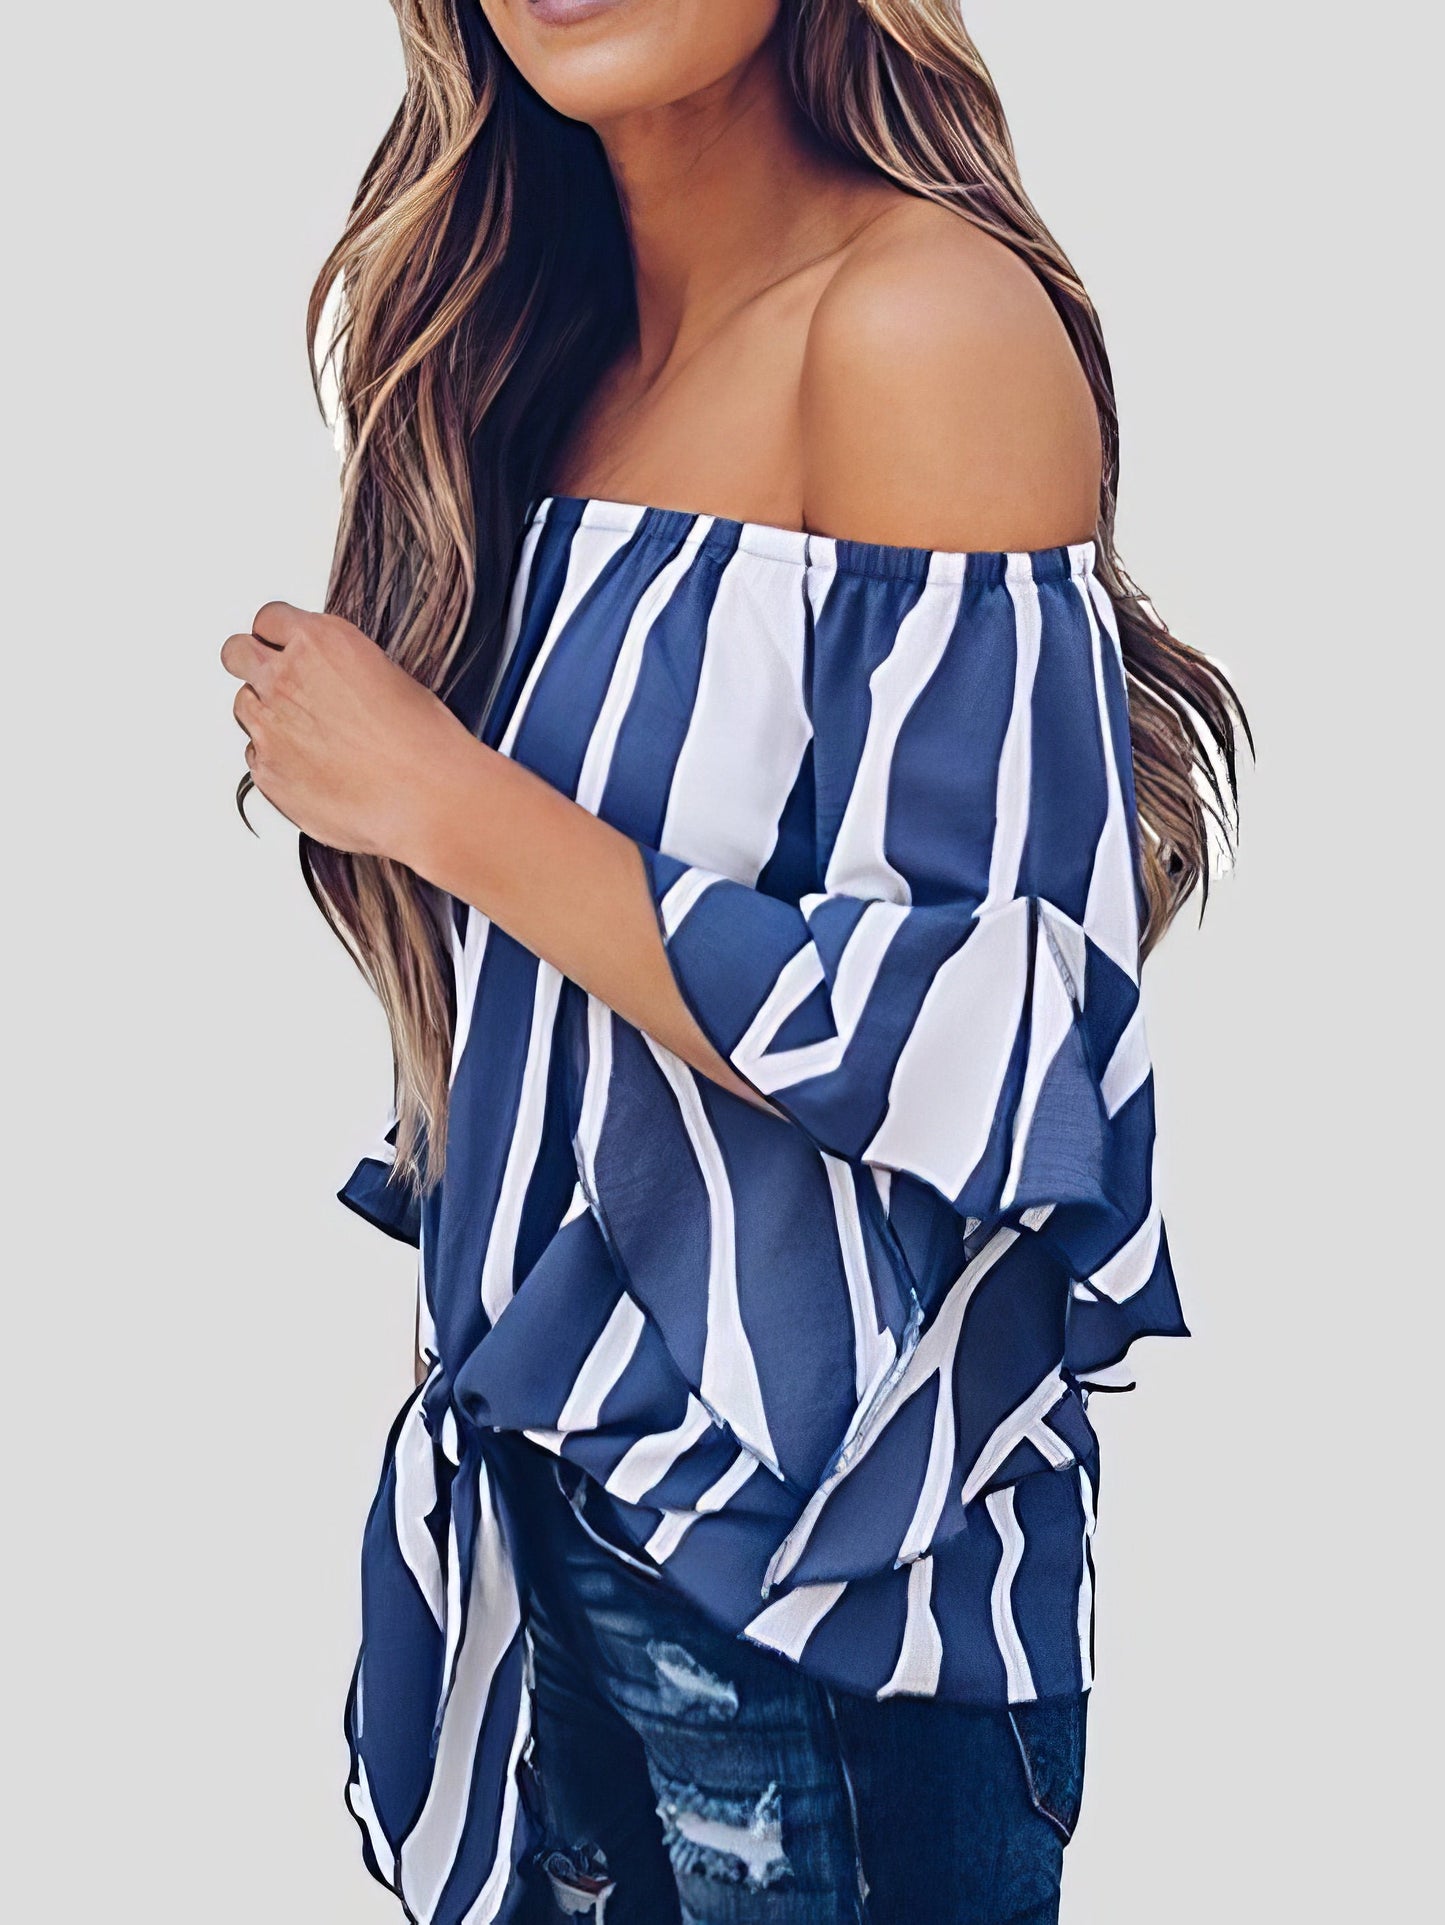 Blouses - Loose Chiffon Off Shoulder Striped Front Tie 3/4 Sleeve Blouses - MsDressly